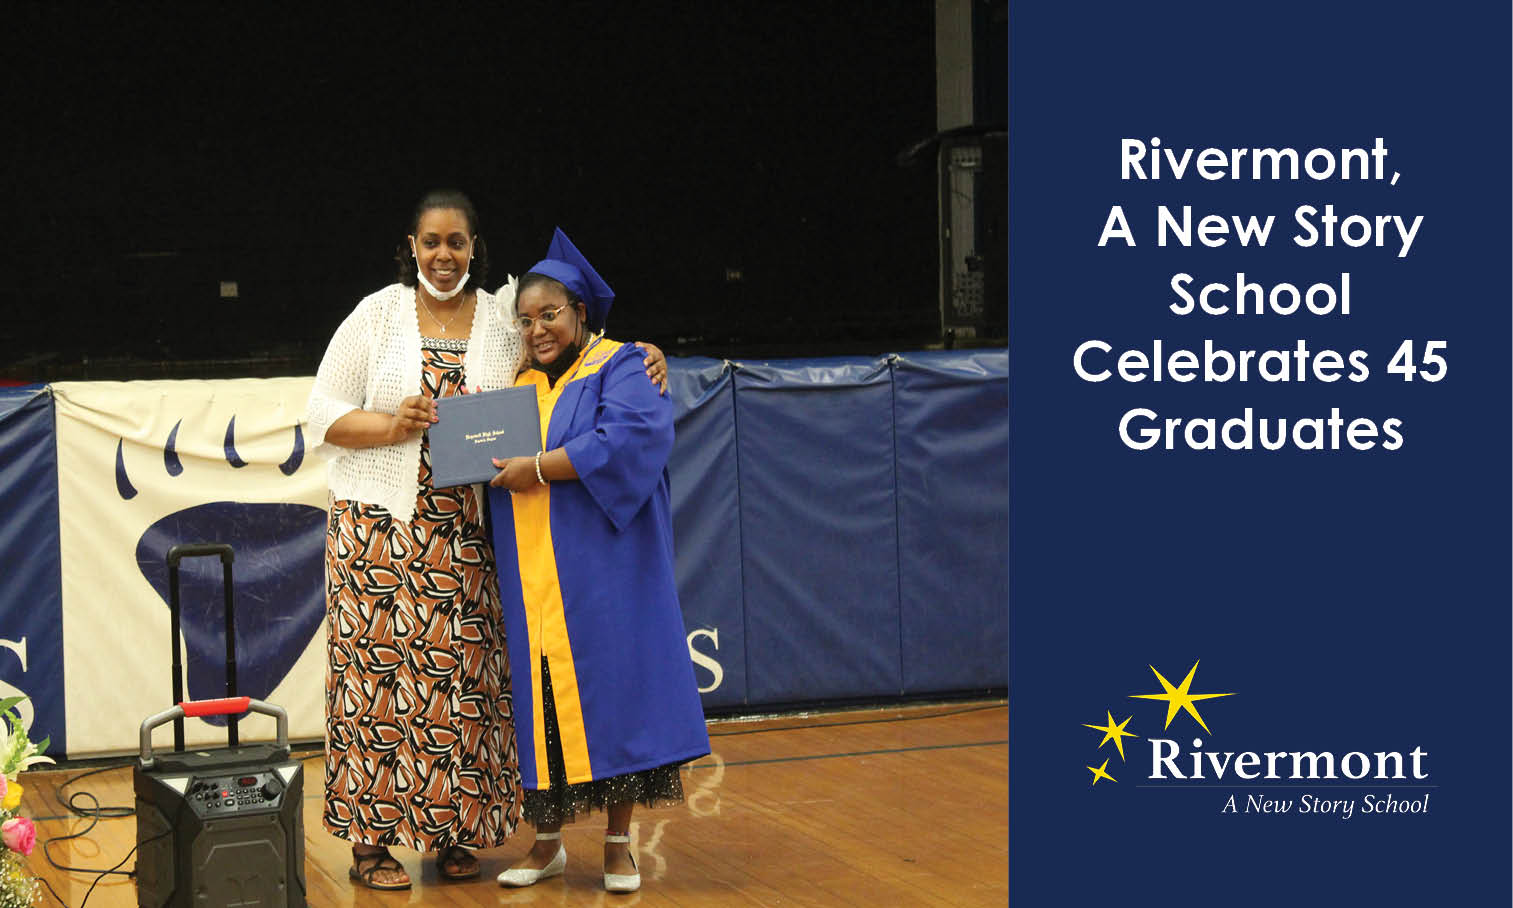 Rivermont Grad social and inner image